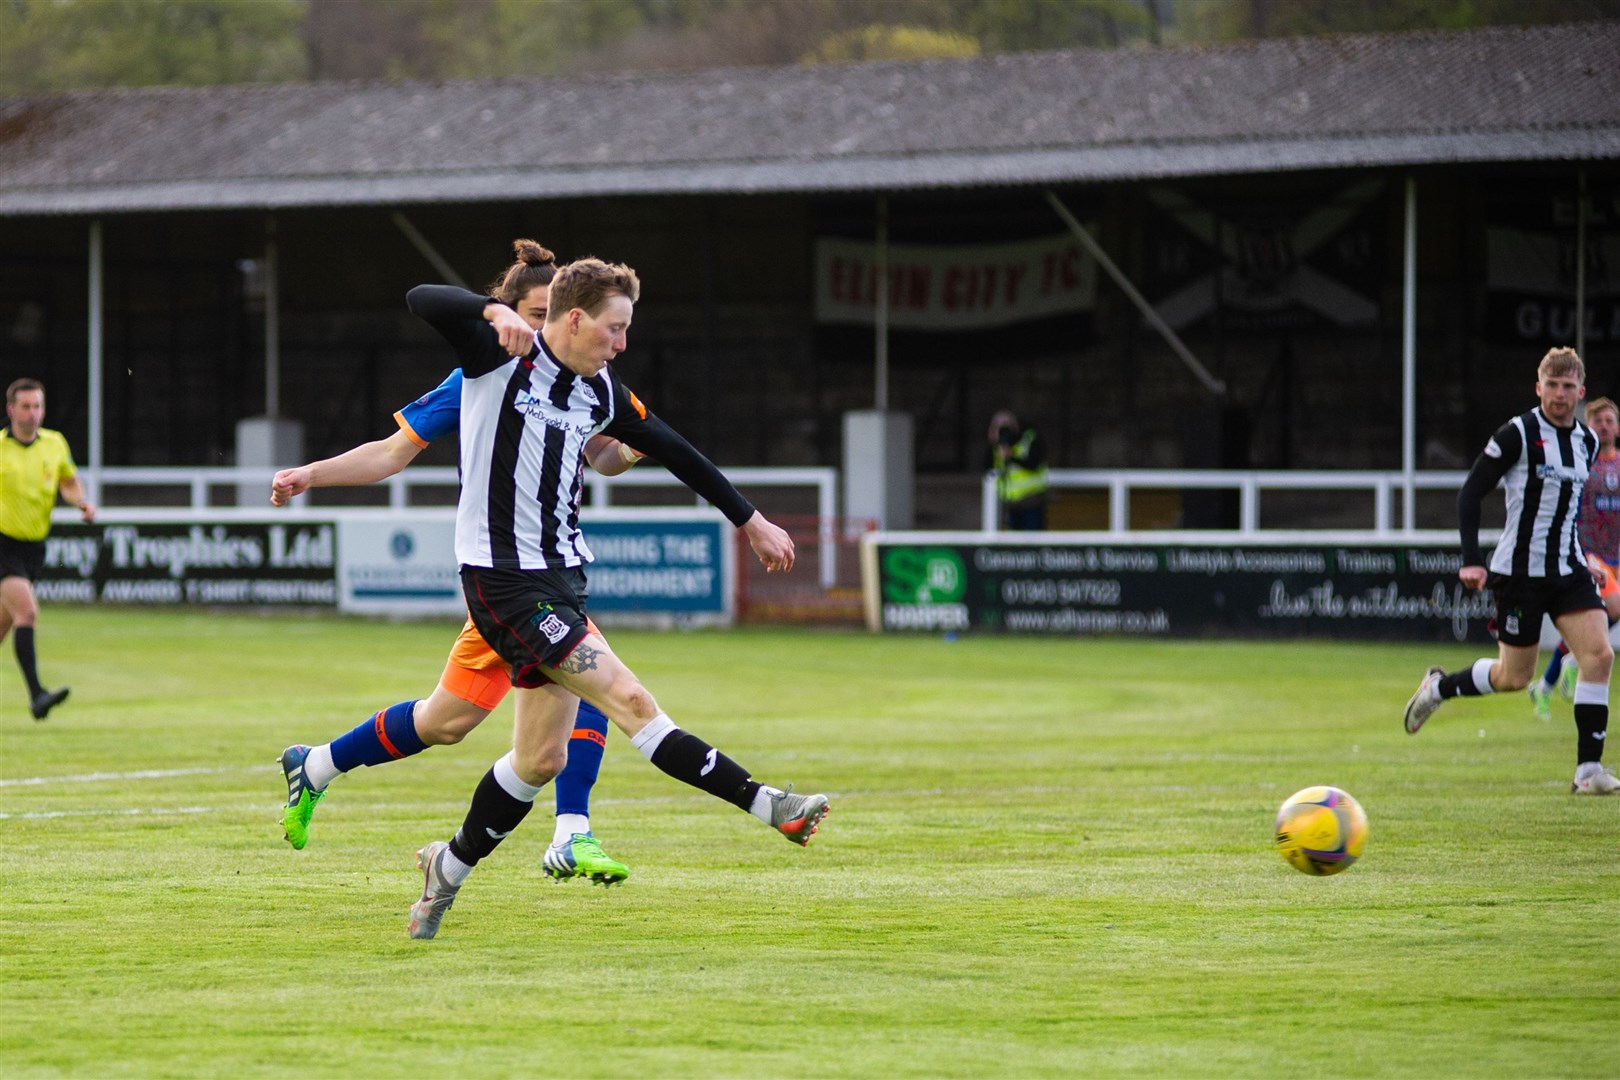 Kane Hester made a surprise appearance as a second half Elgin sub. Picture: Daniel Forsyth..